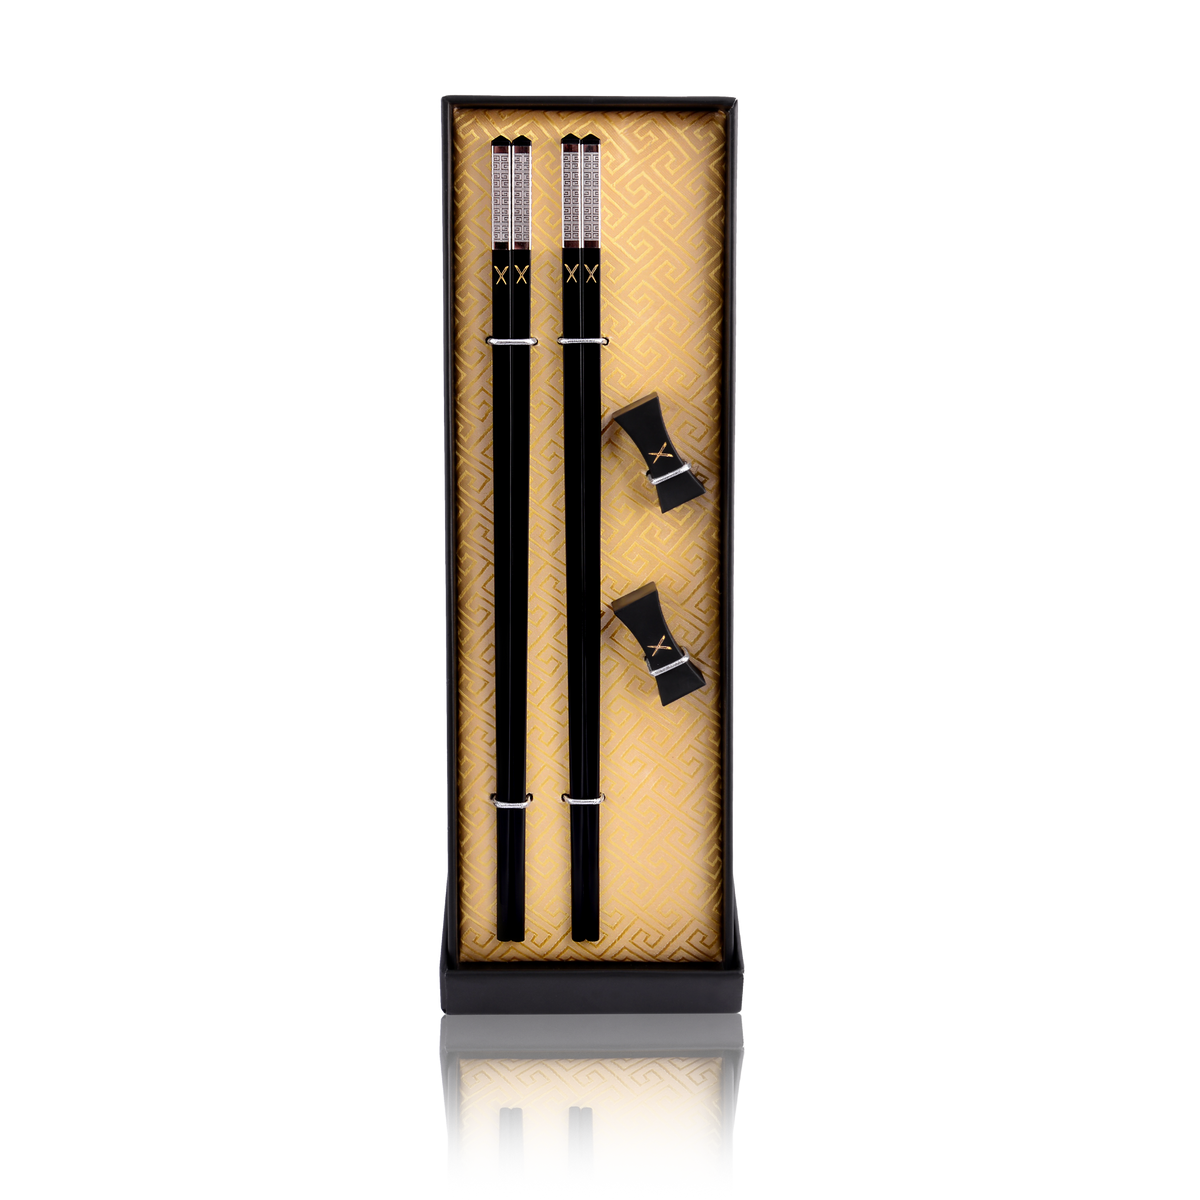 Luxury Chopsticks Set. Our chopsticks are luxurious, reusable and safe to use. Packed in a beautiful set, our designs are modern, traditional and elegant. X-quisite - LuxSticks